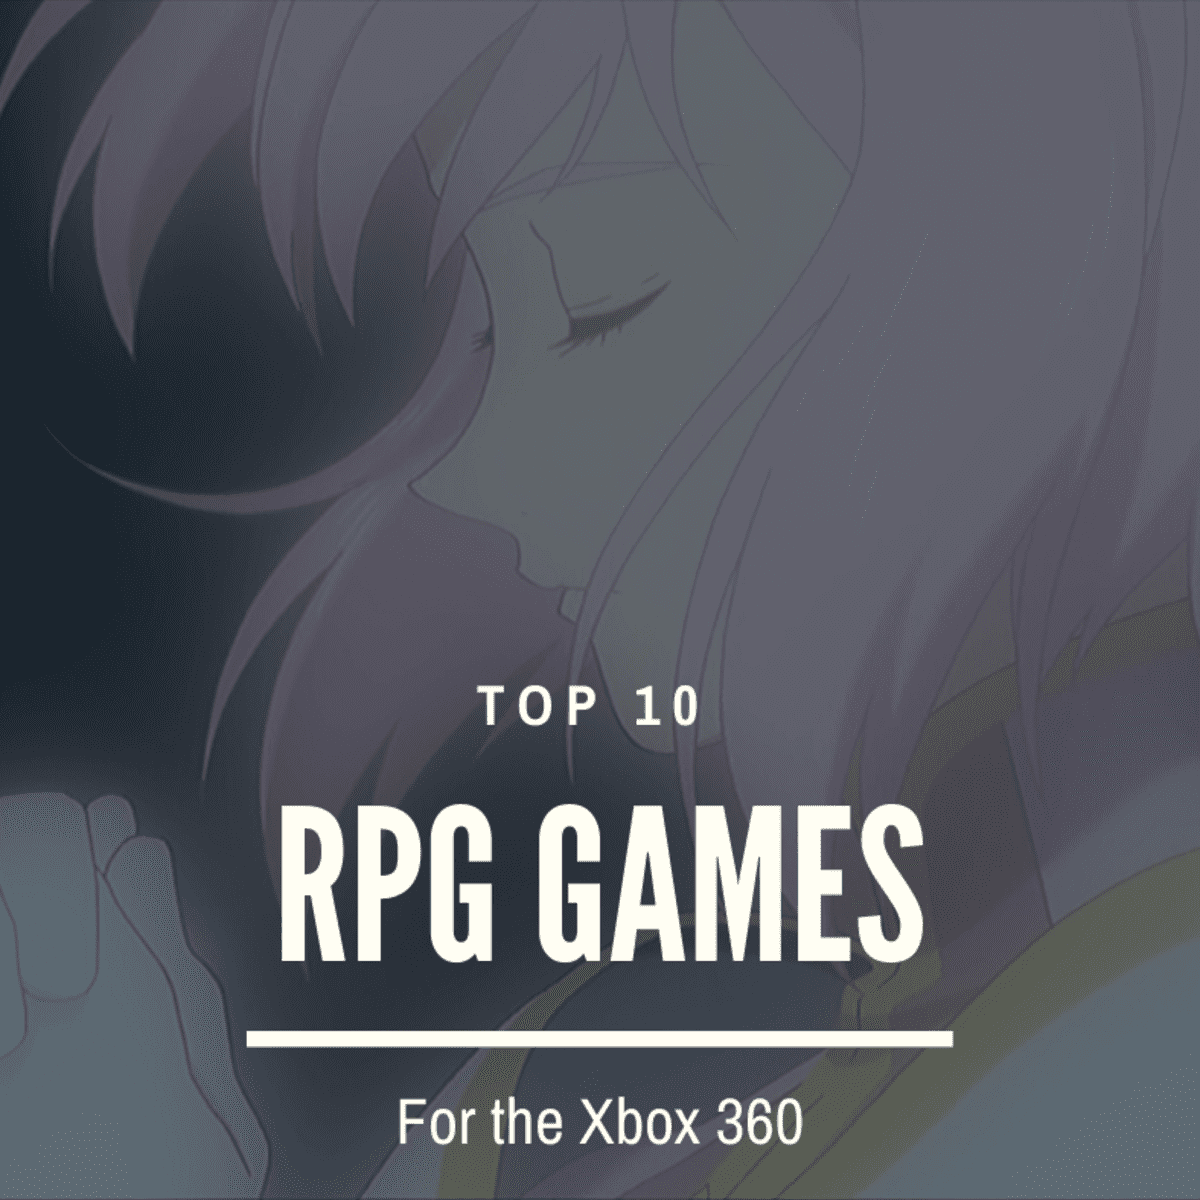 Like Bad luck Really The Top 10 Best RPG Games for the Xbox 360 - LevelSkip